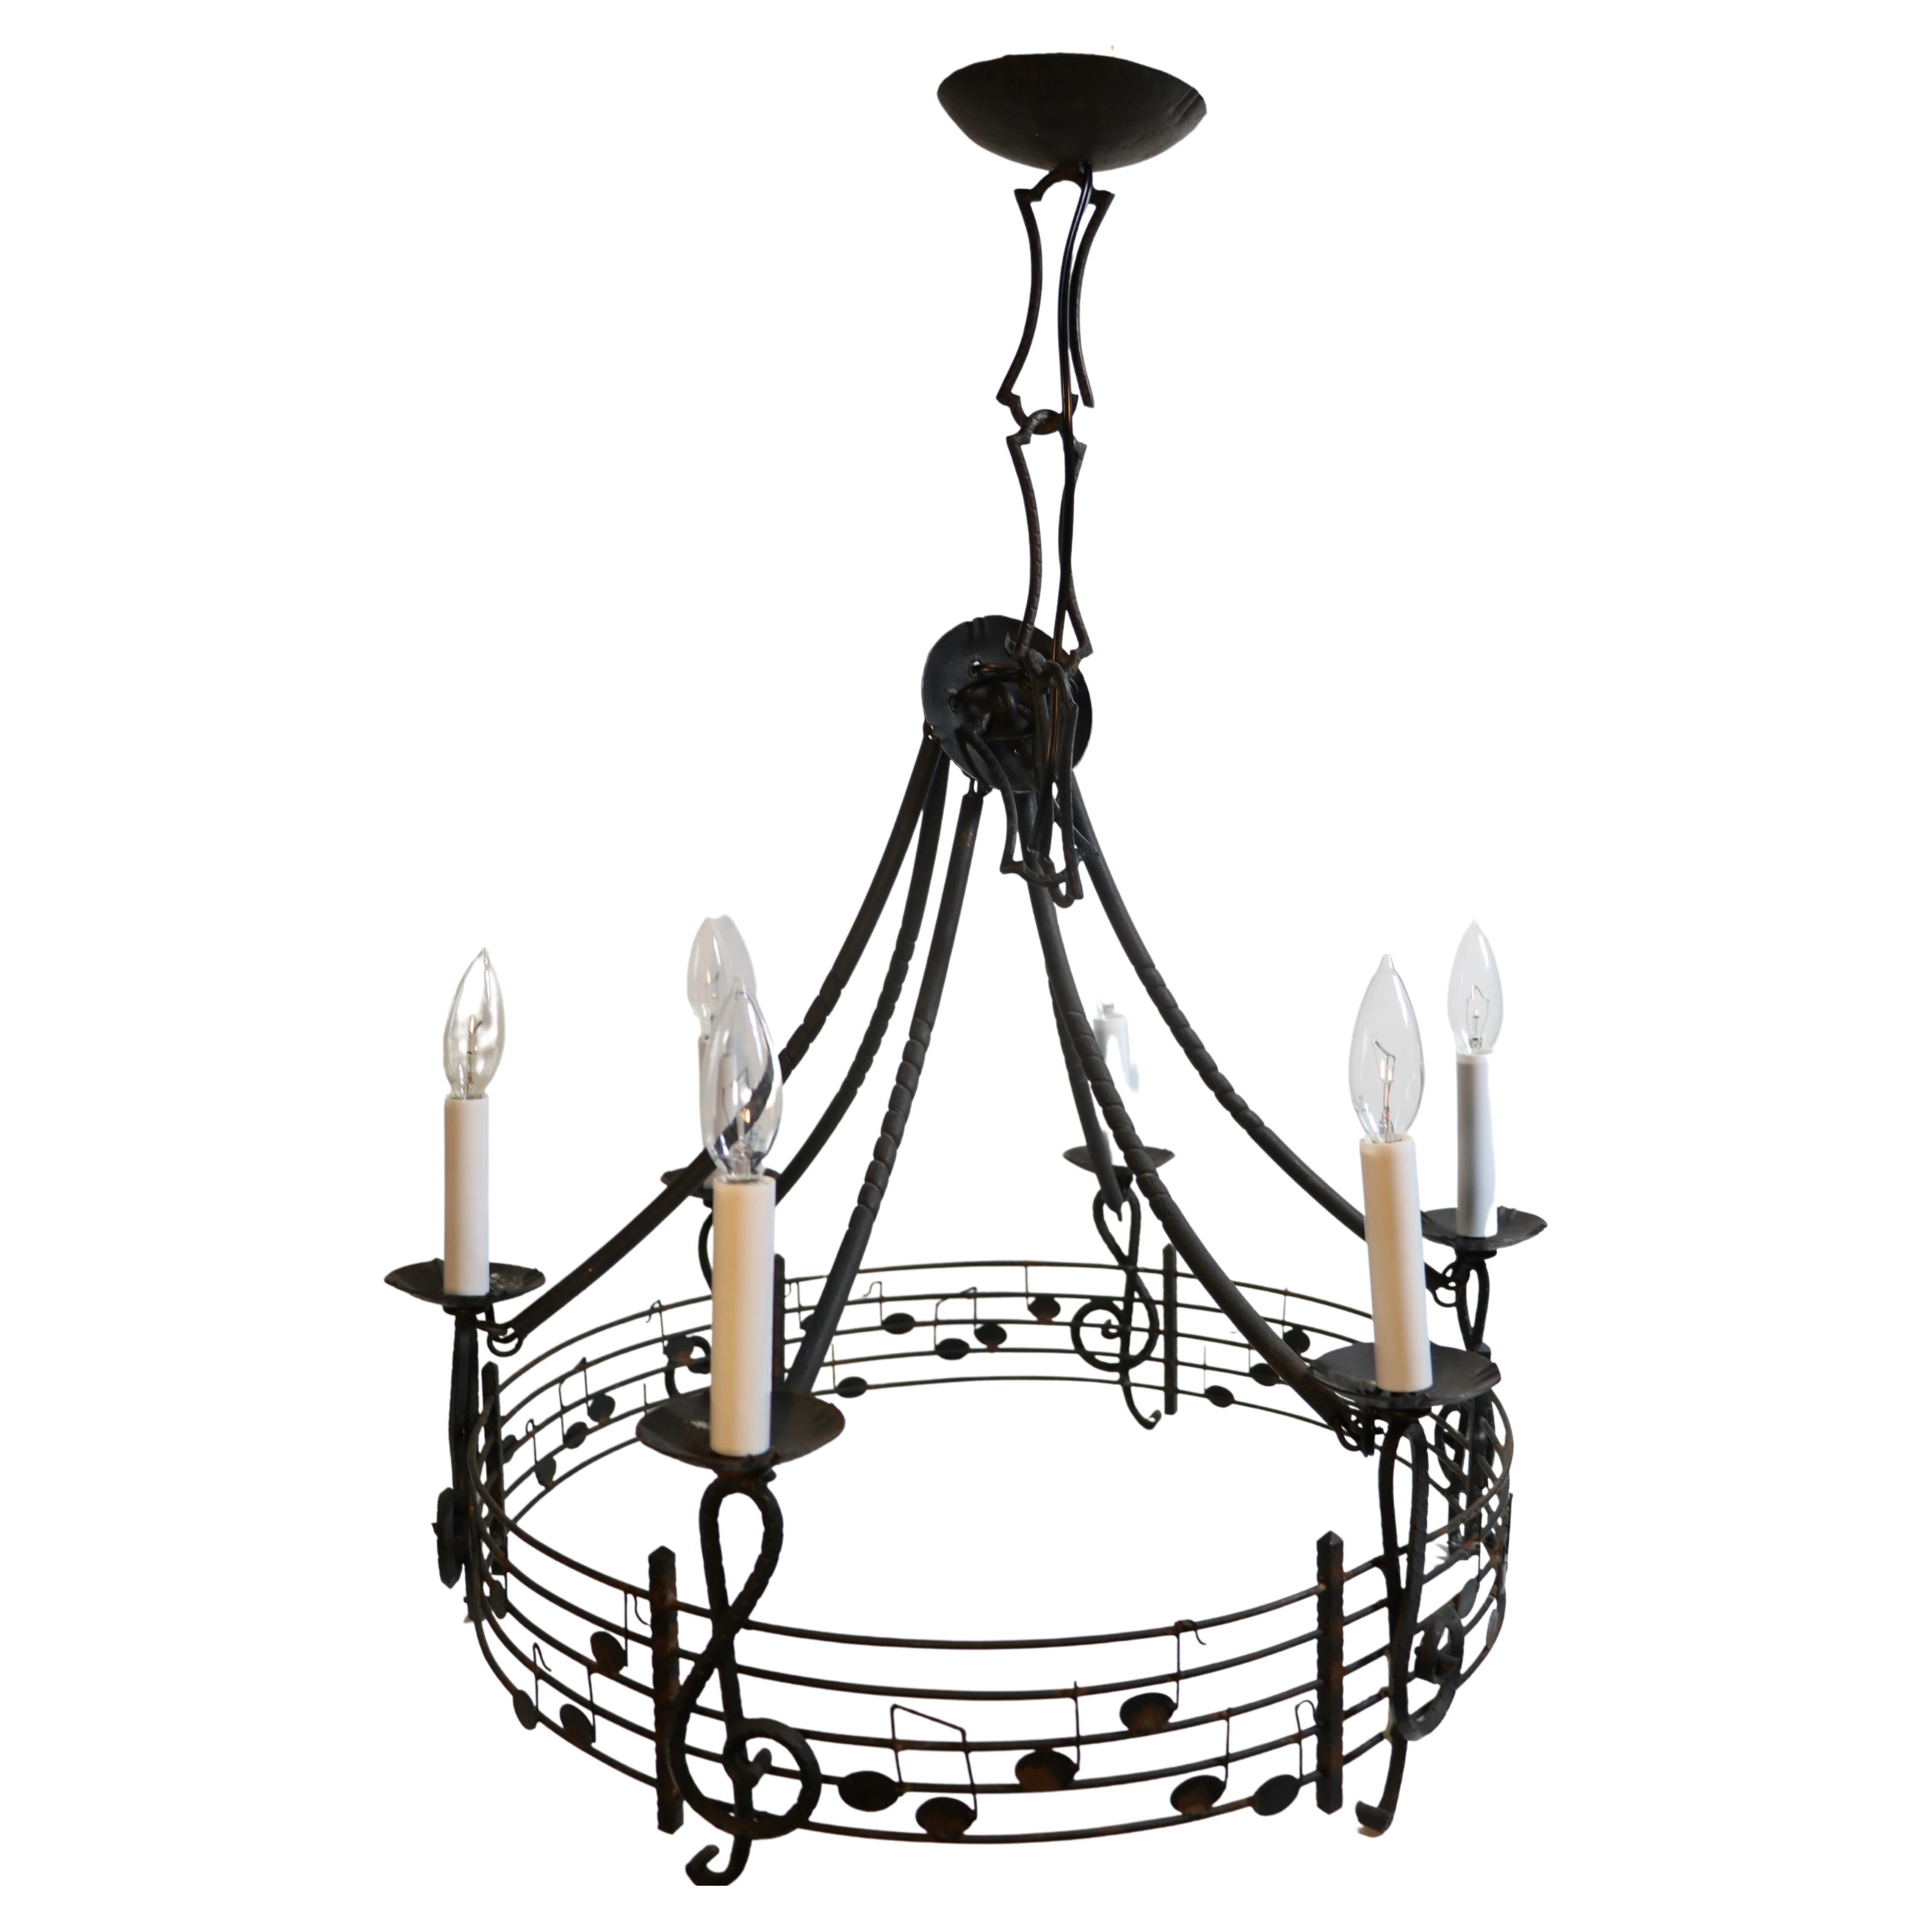 Musical Motif Brutalist Wrought Iron Chandelier Made in Hungary